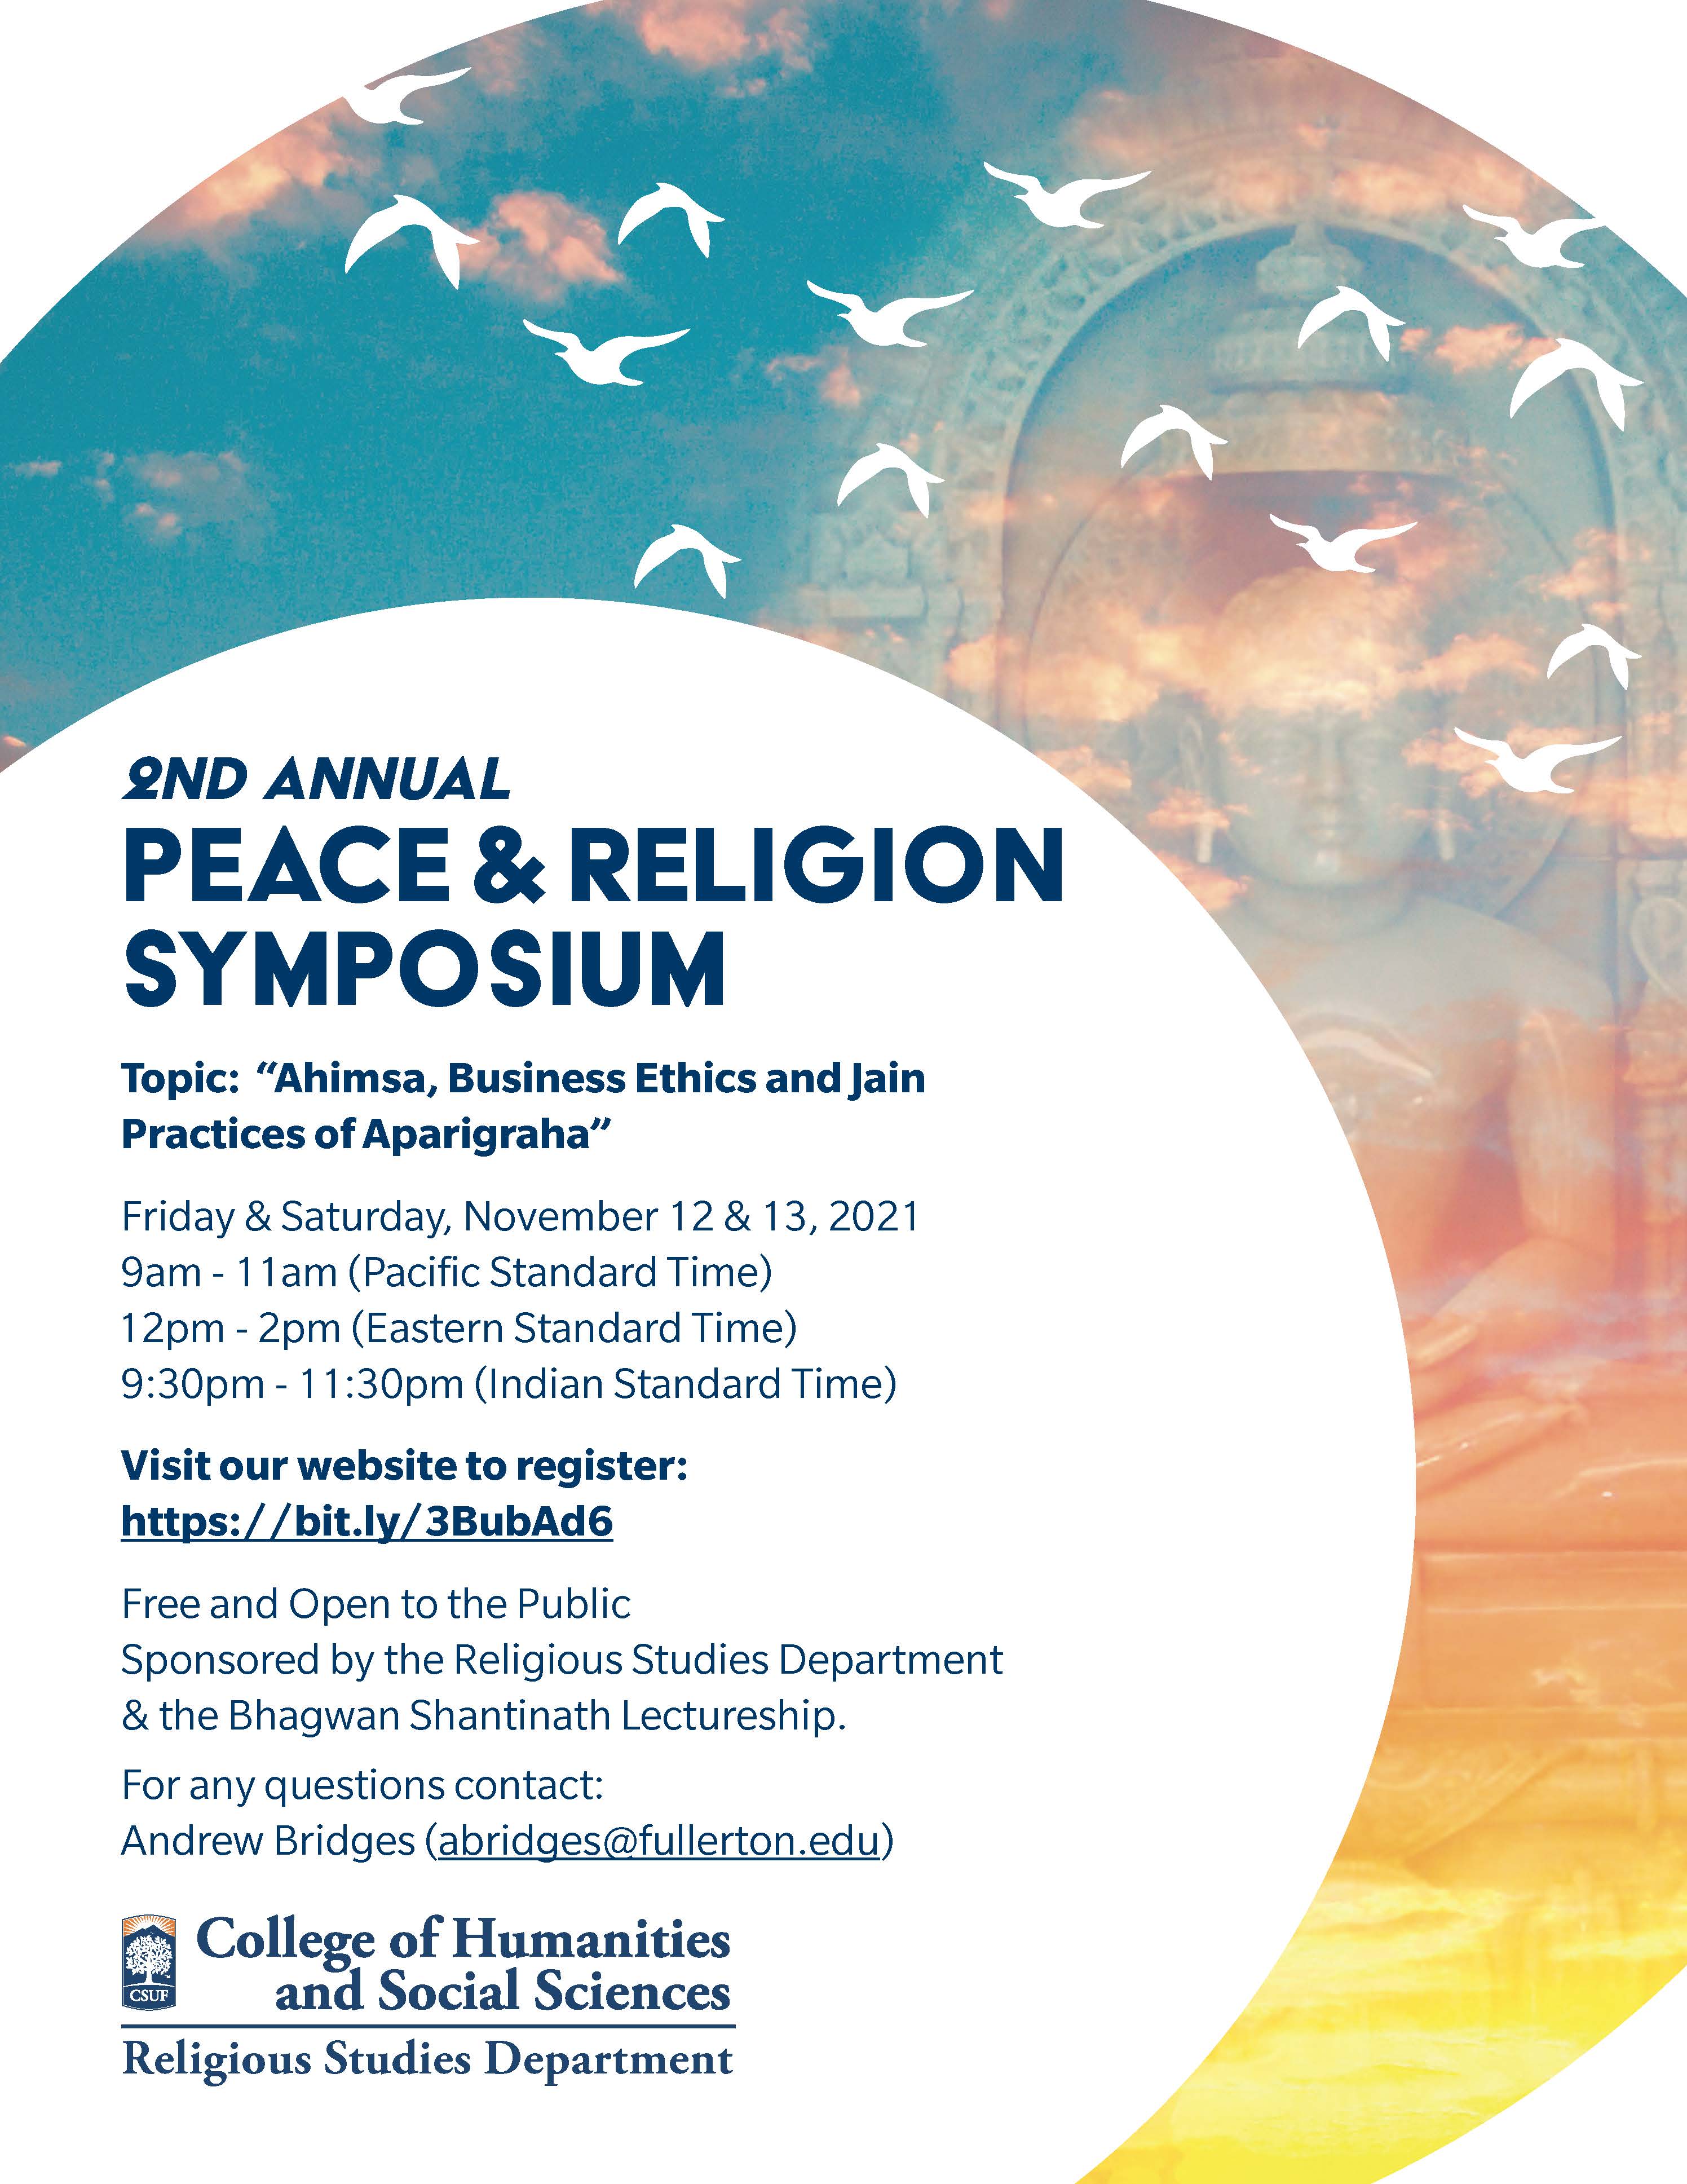 2nd Annual Peace & Religion Symposium flyer